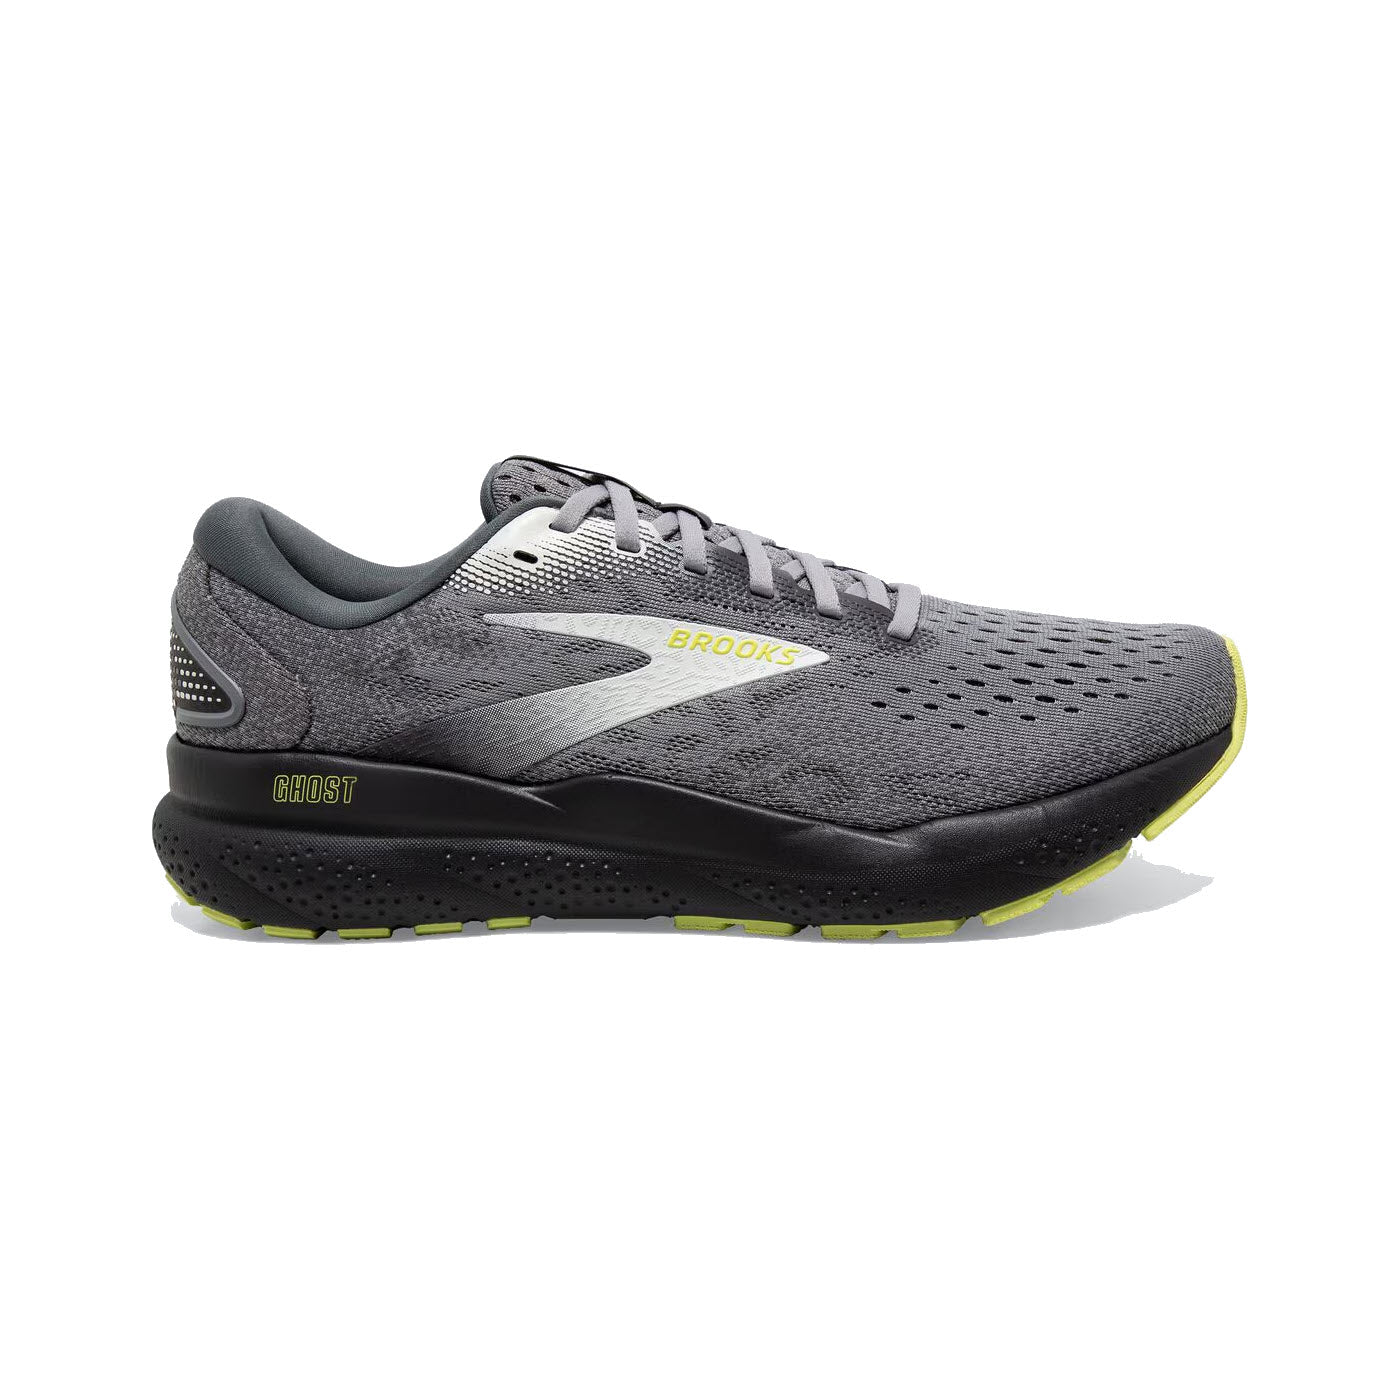 A single men's Brooks Ghost 16 running shoe with a grey upper, white logo, and black sole featuring yellow accents.